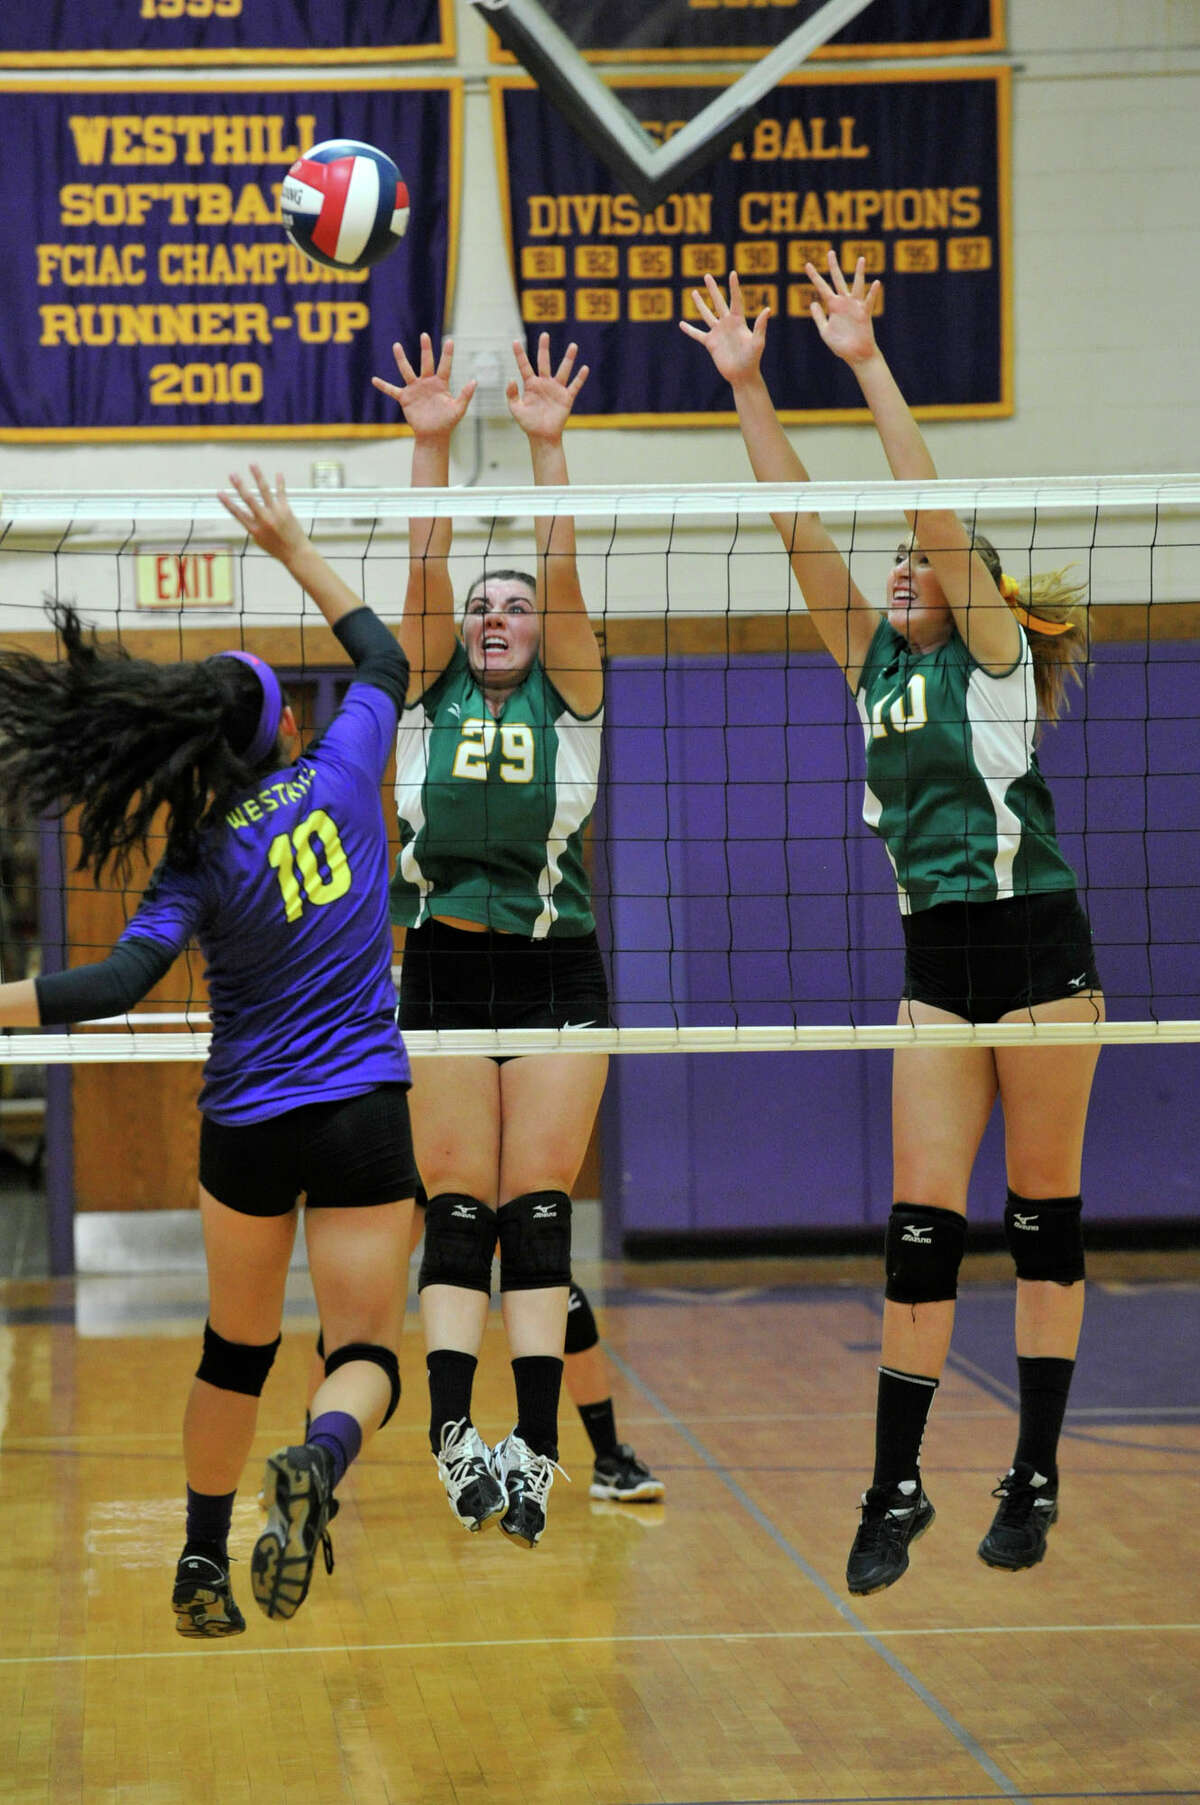 Westhill's Silvana Cardona hits the ball over a leaping Leah Zarrilli (29) and Emily Ellis of Trinity Catholic during their volleyball match at Westhill High School in Stamford on Friday. Trinity Catholic won 3-0.